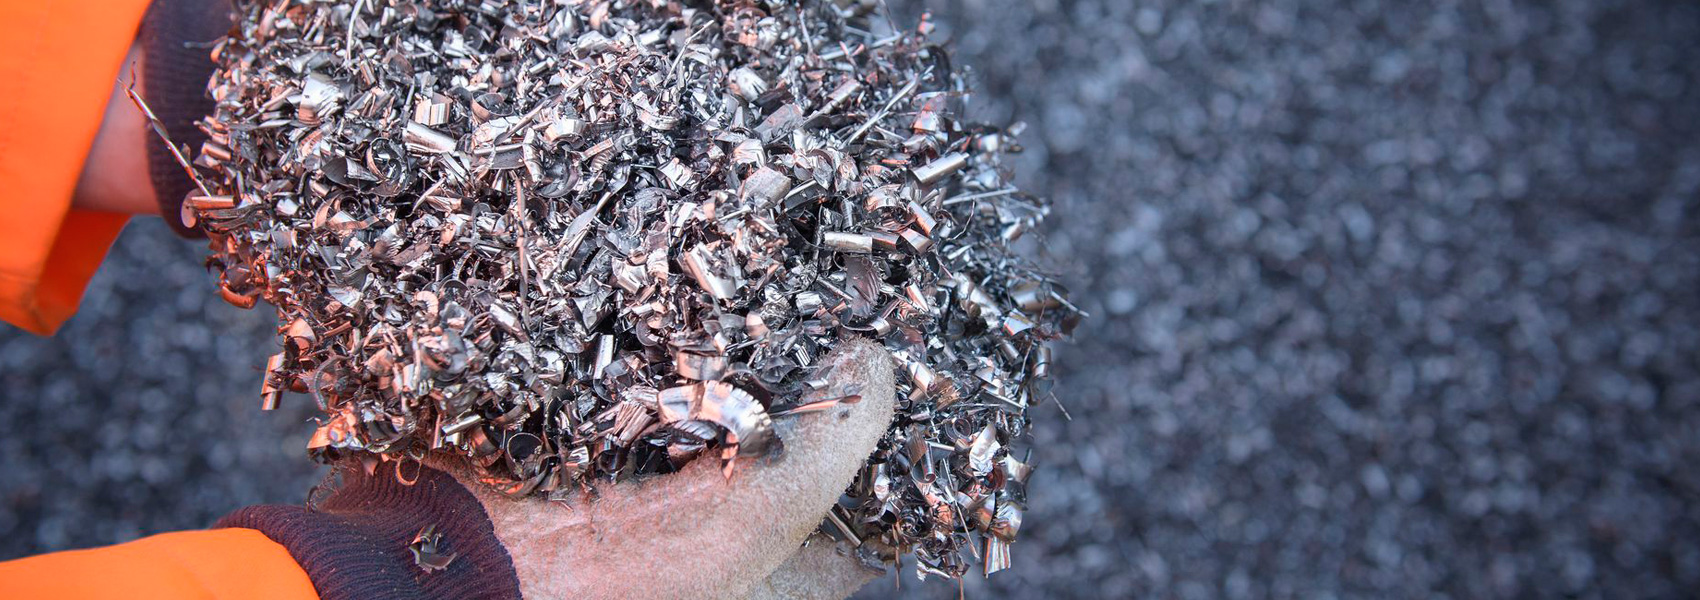 Essential Things to Know About Recycling Stainless Steel Metals